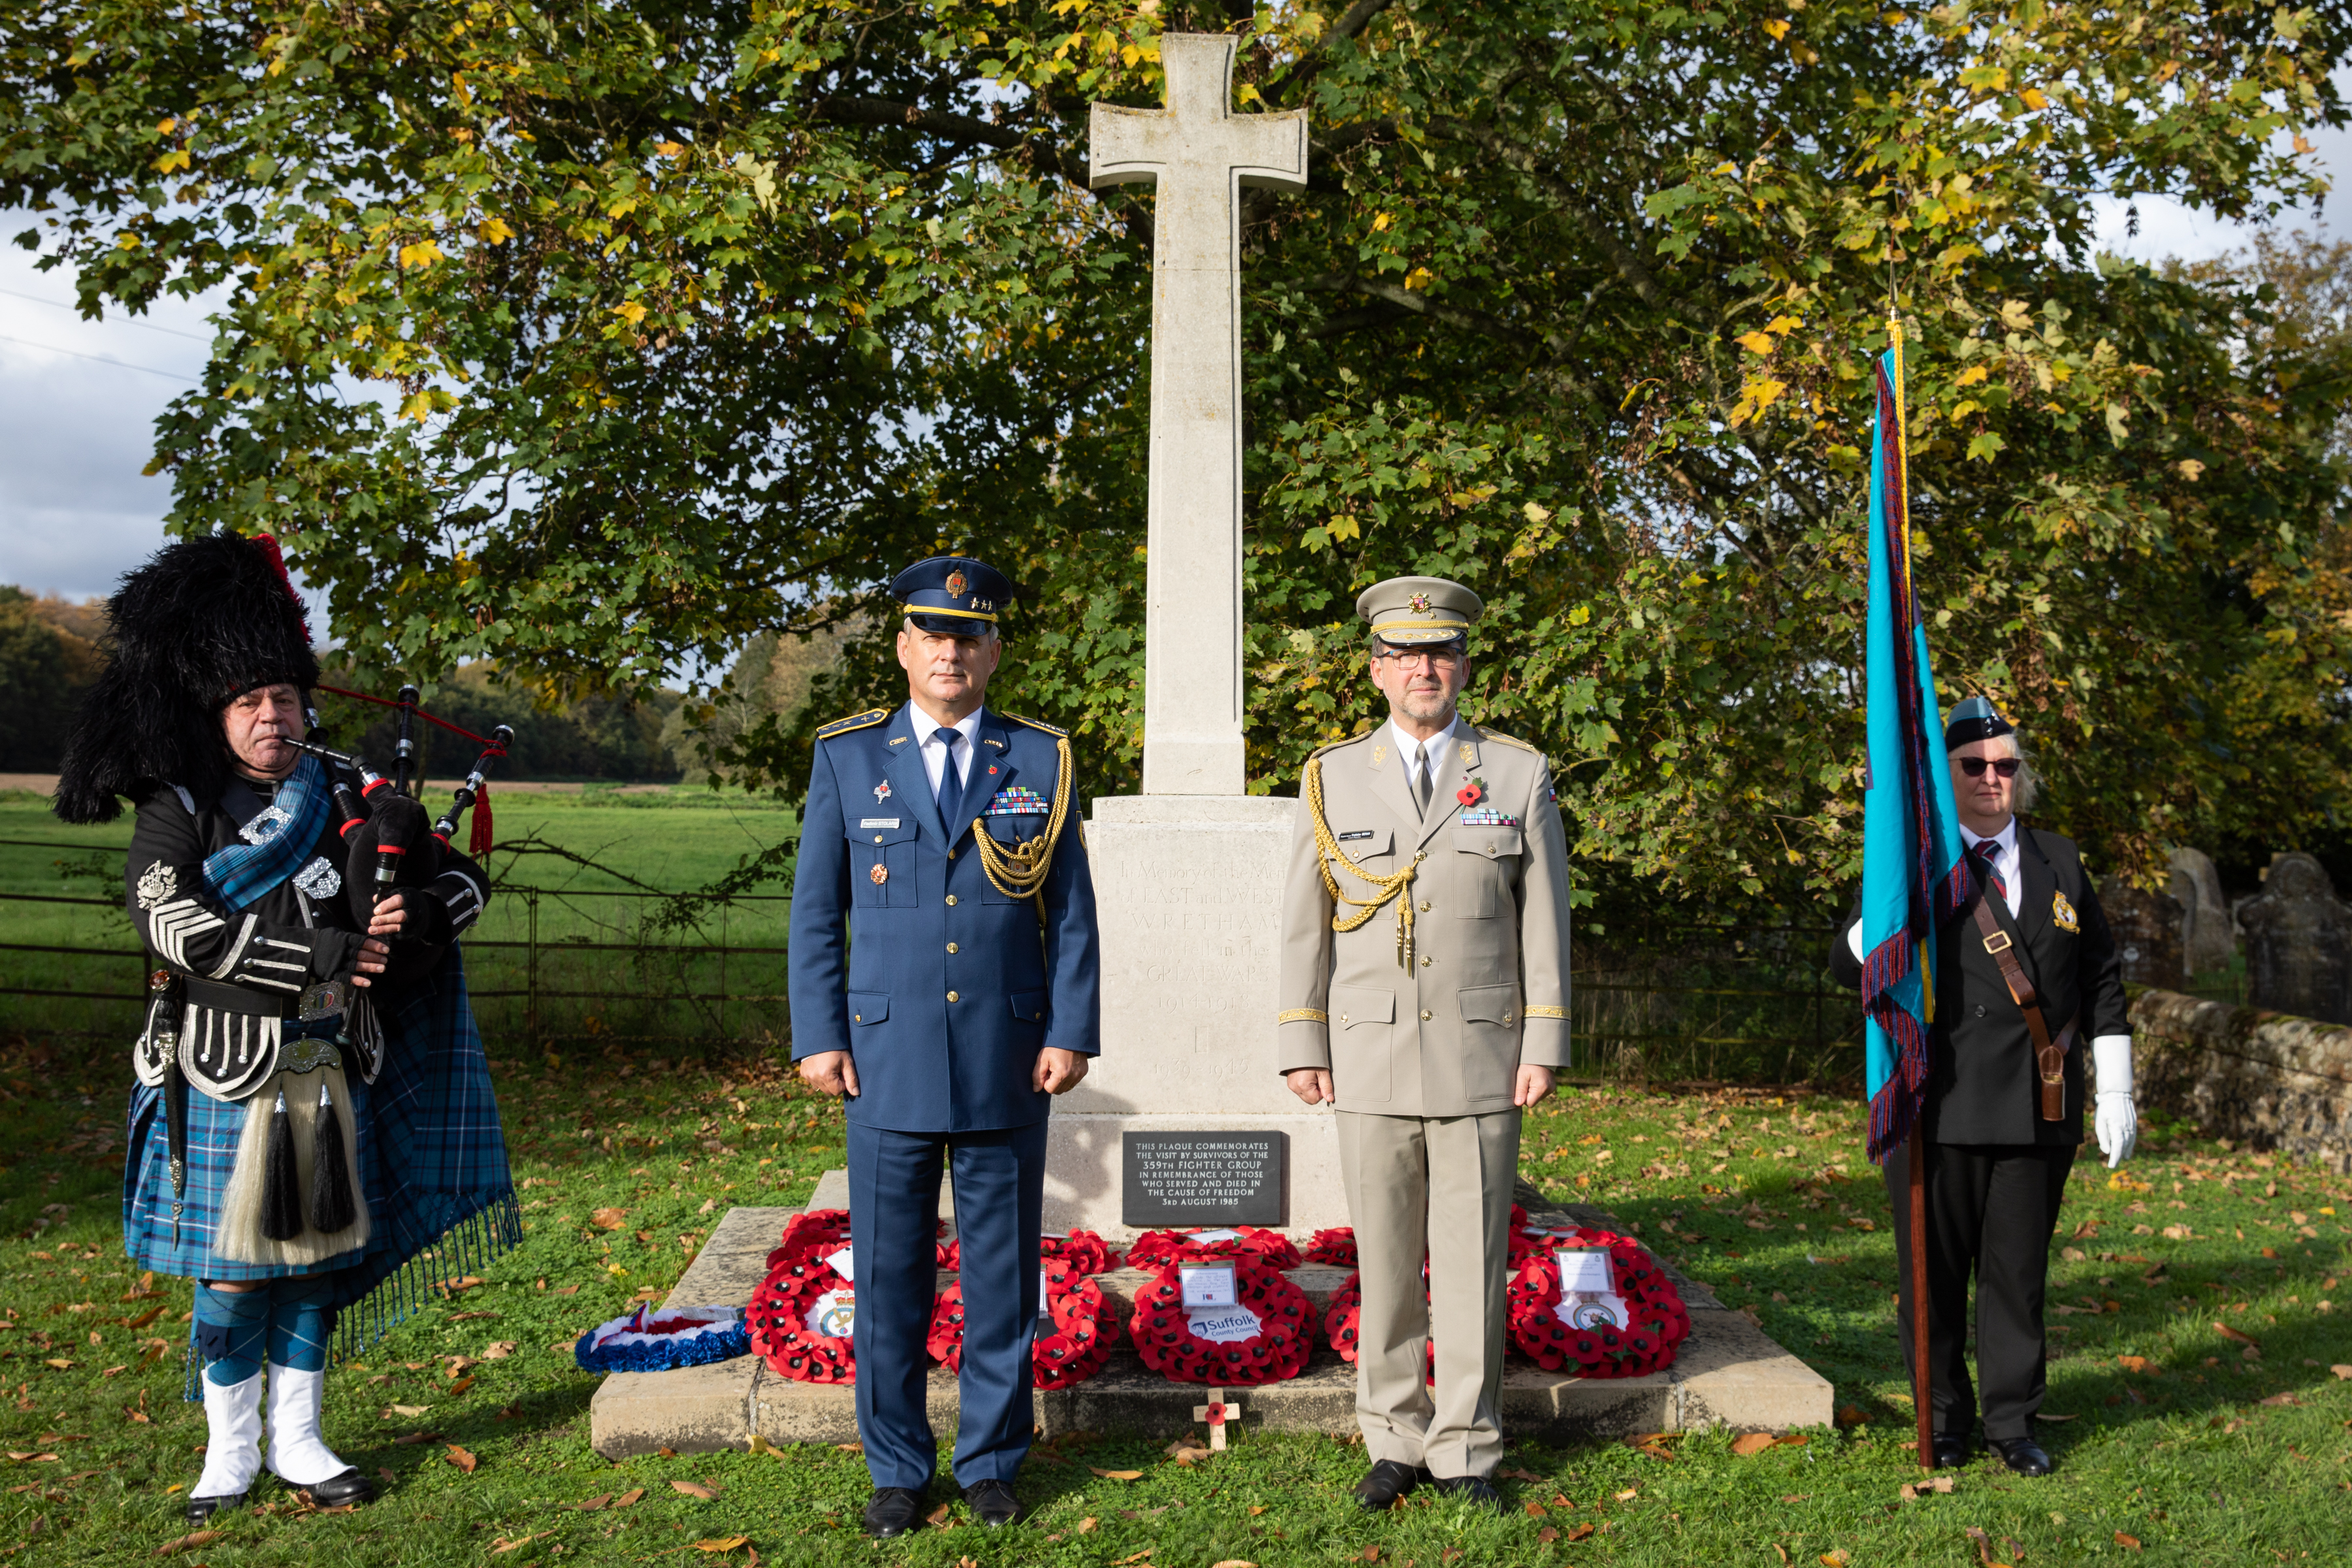 Image shows RAF aviators standing by memorial laid with poppy wreaths.